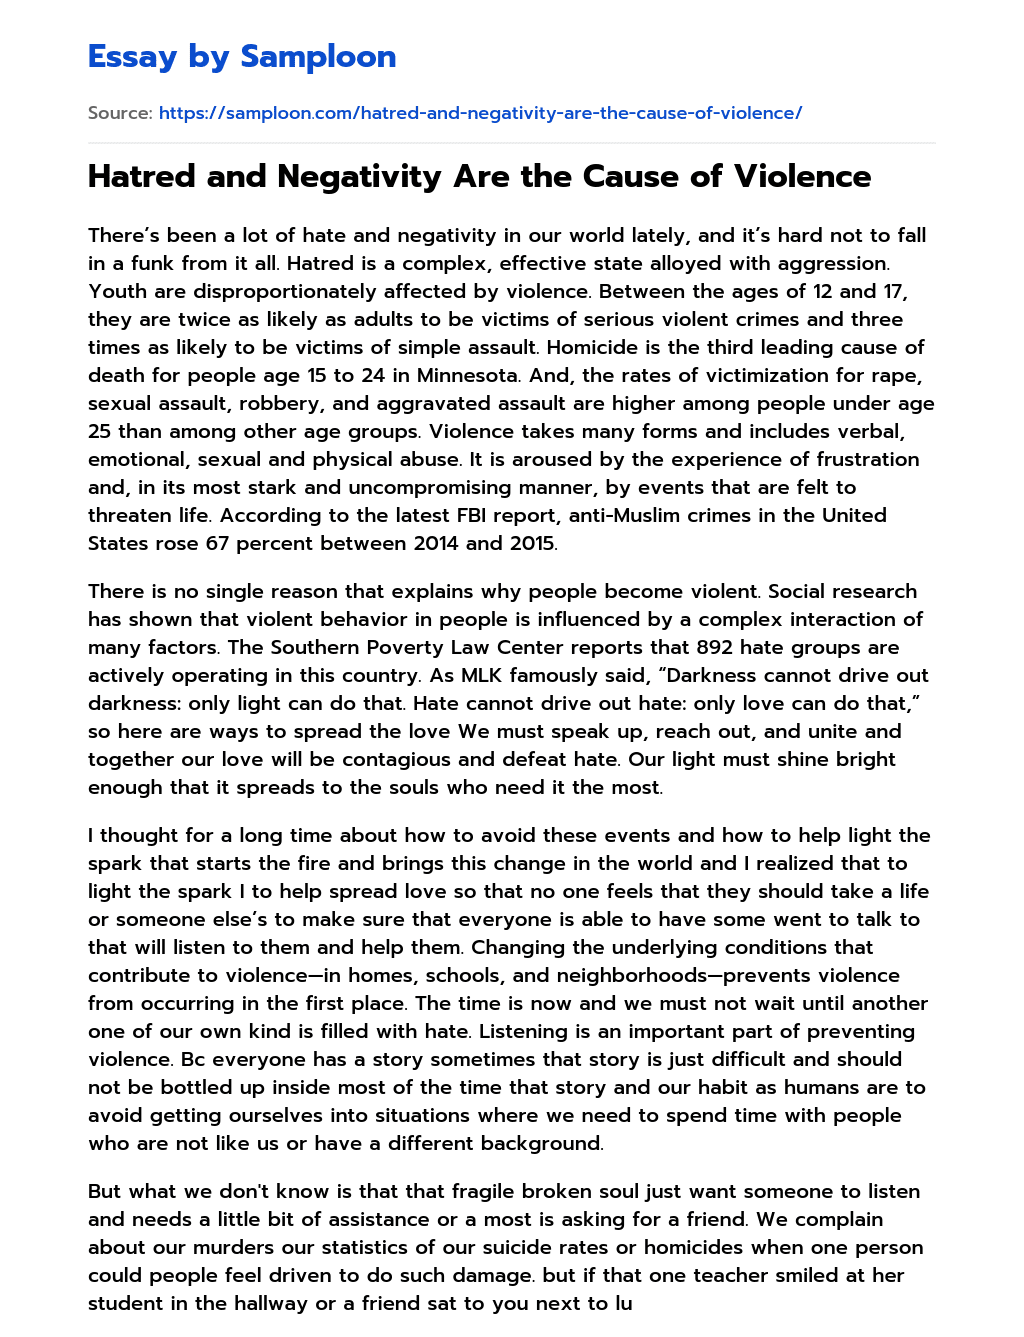 Hatred and Negativity Are the Cause of Violence essay